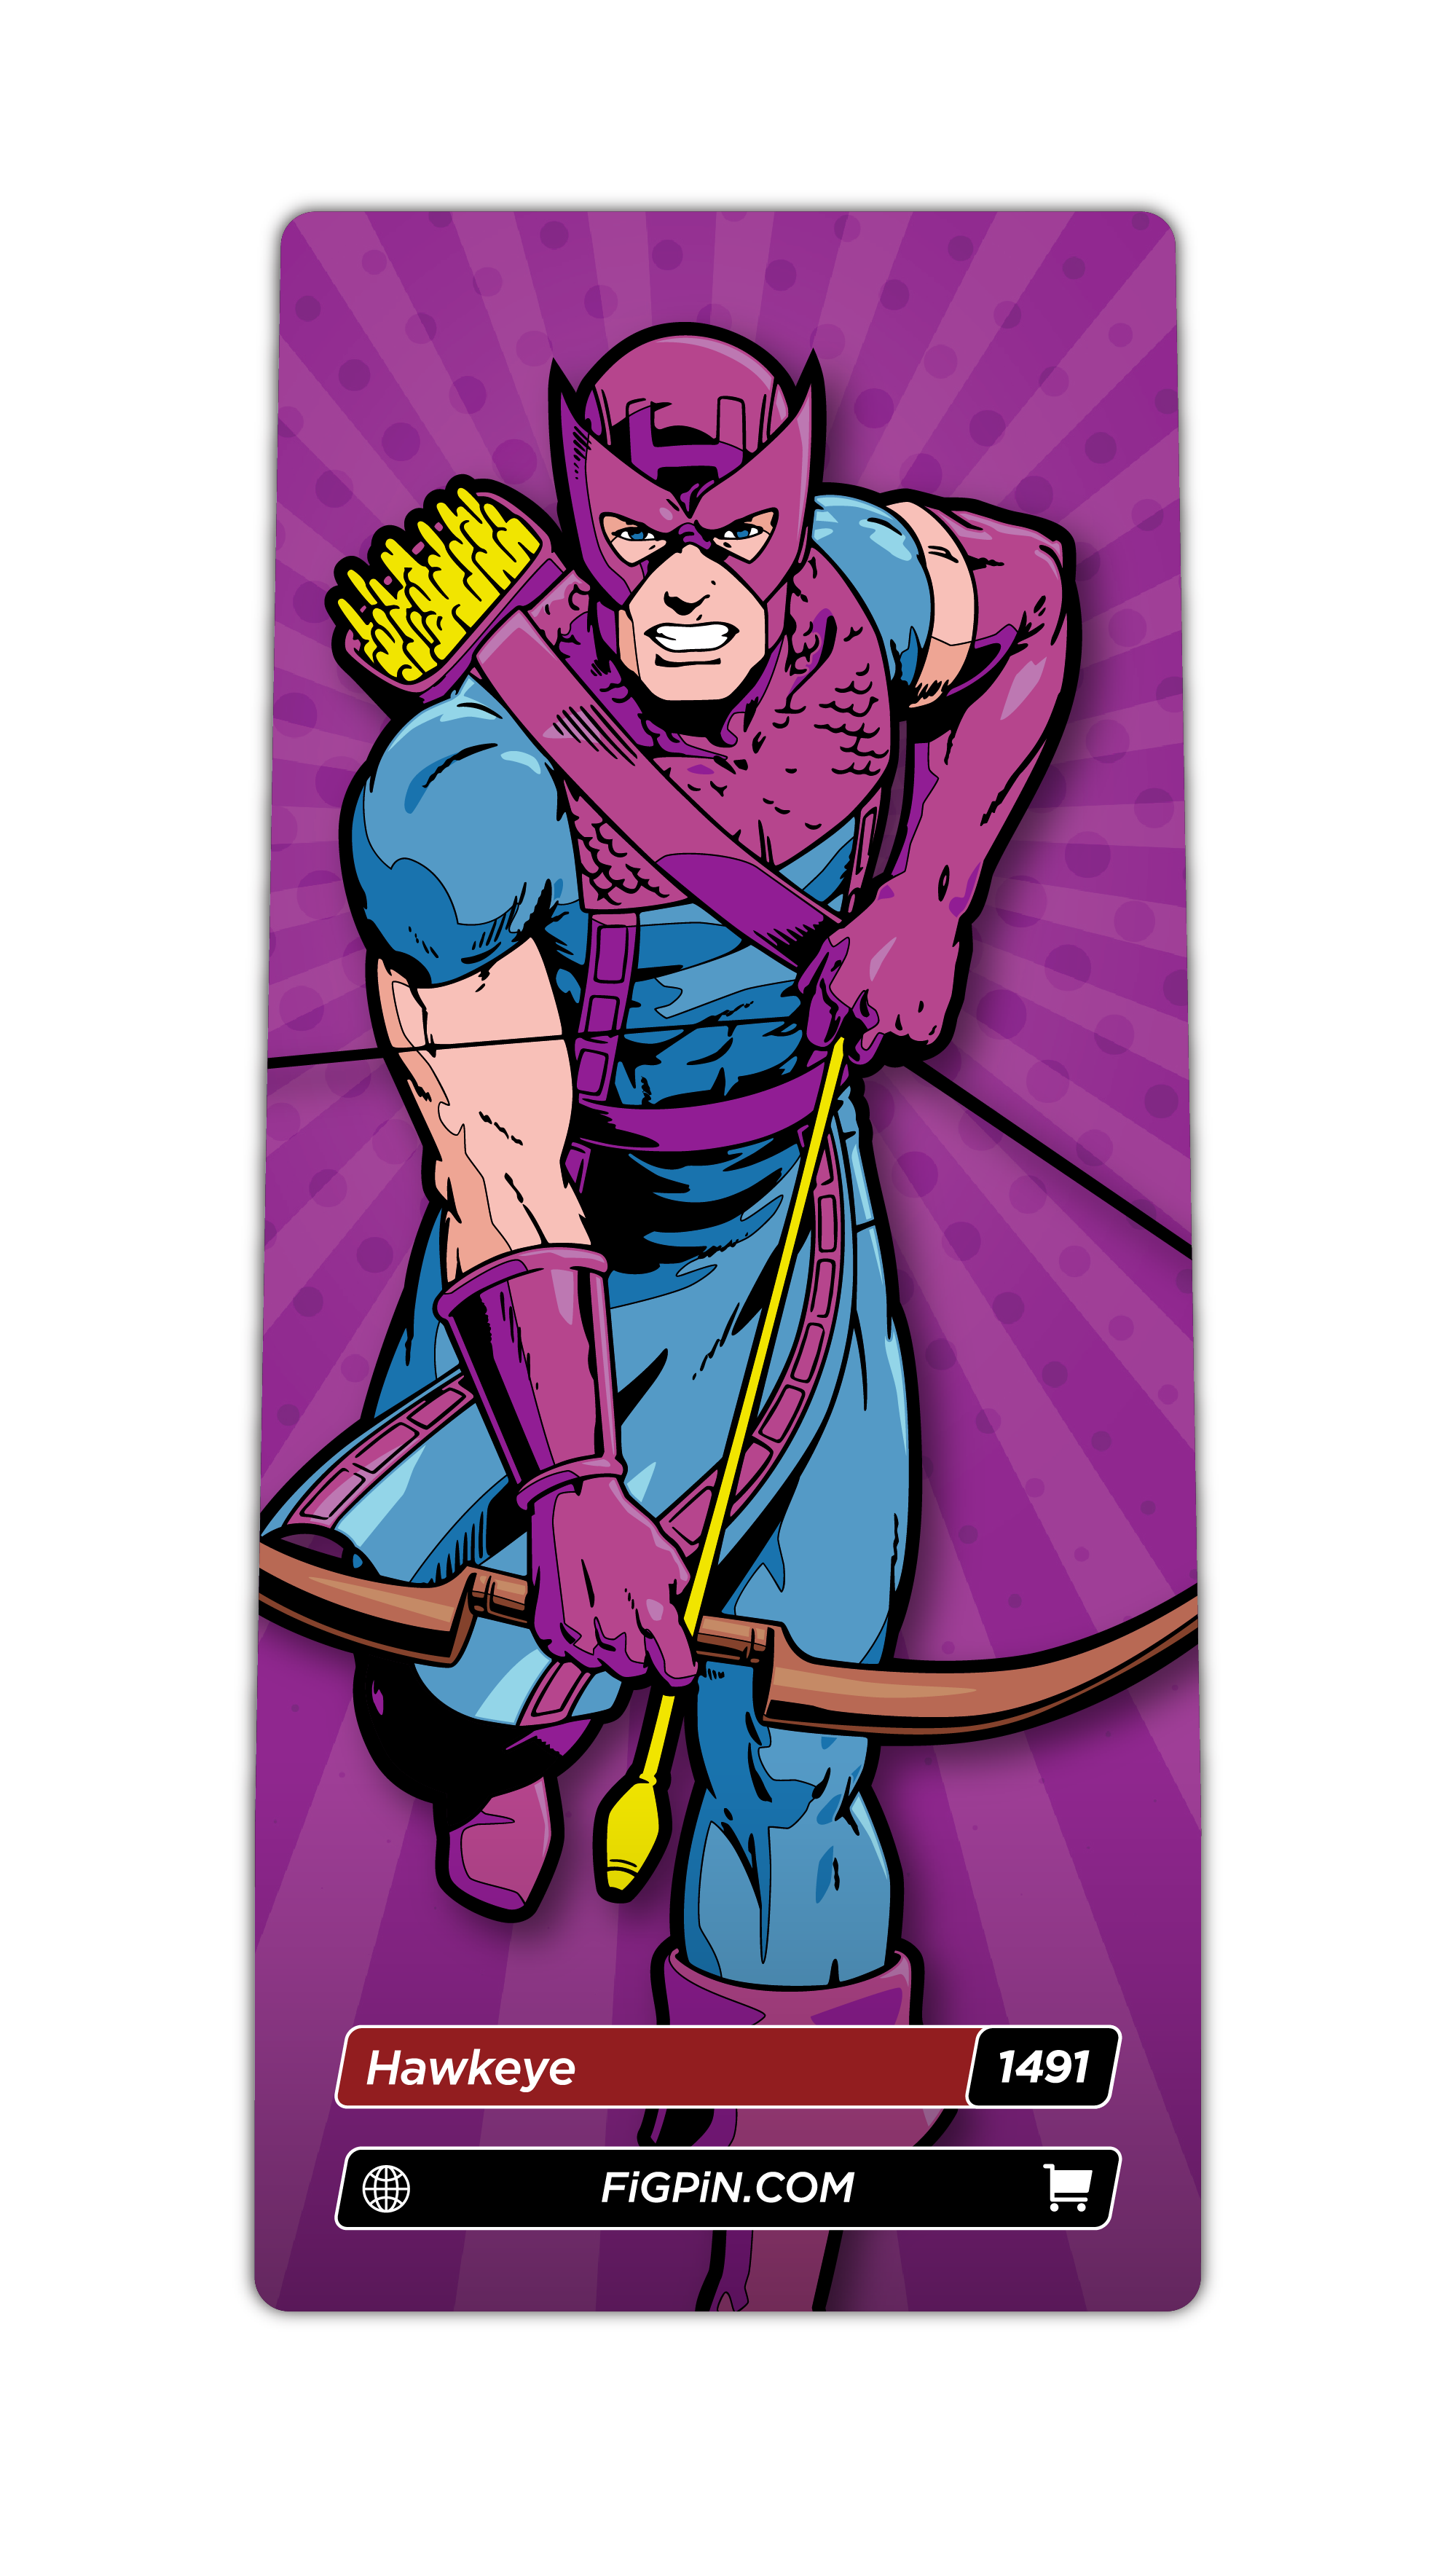 Character card of Marvel's Hawkeye with text “Hawkeye (1491)” and link to FiGPiN’s website